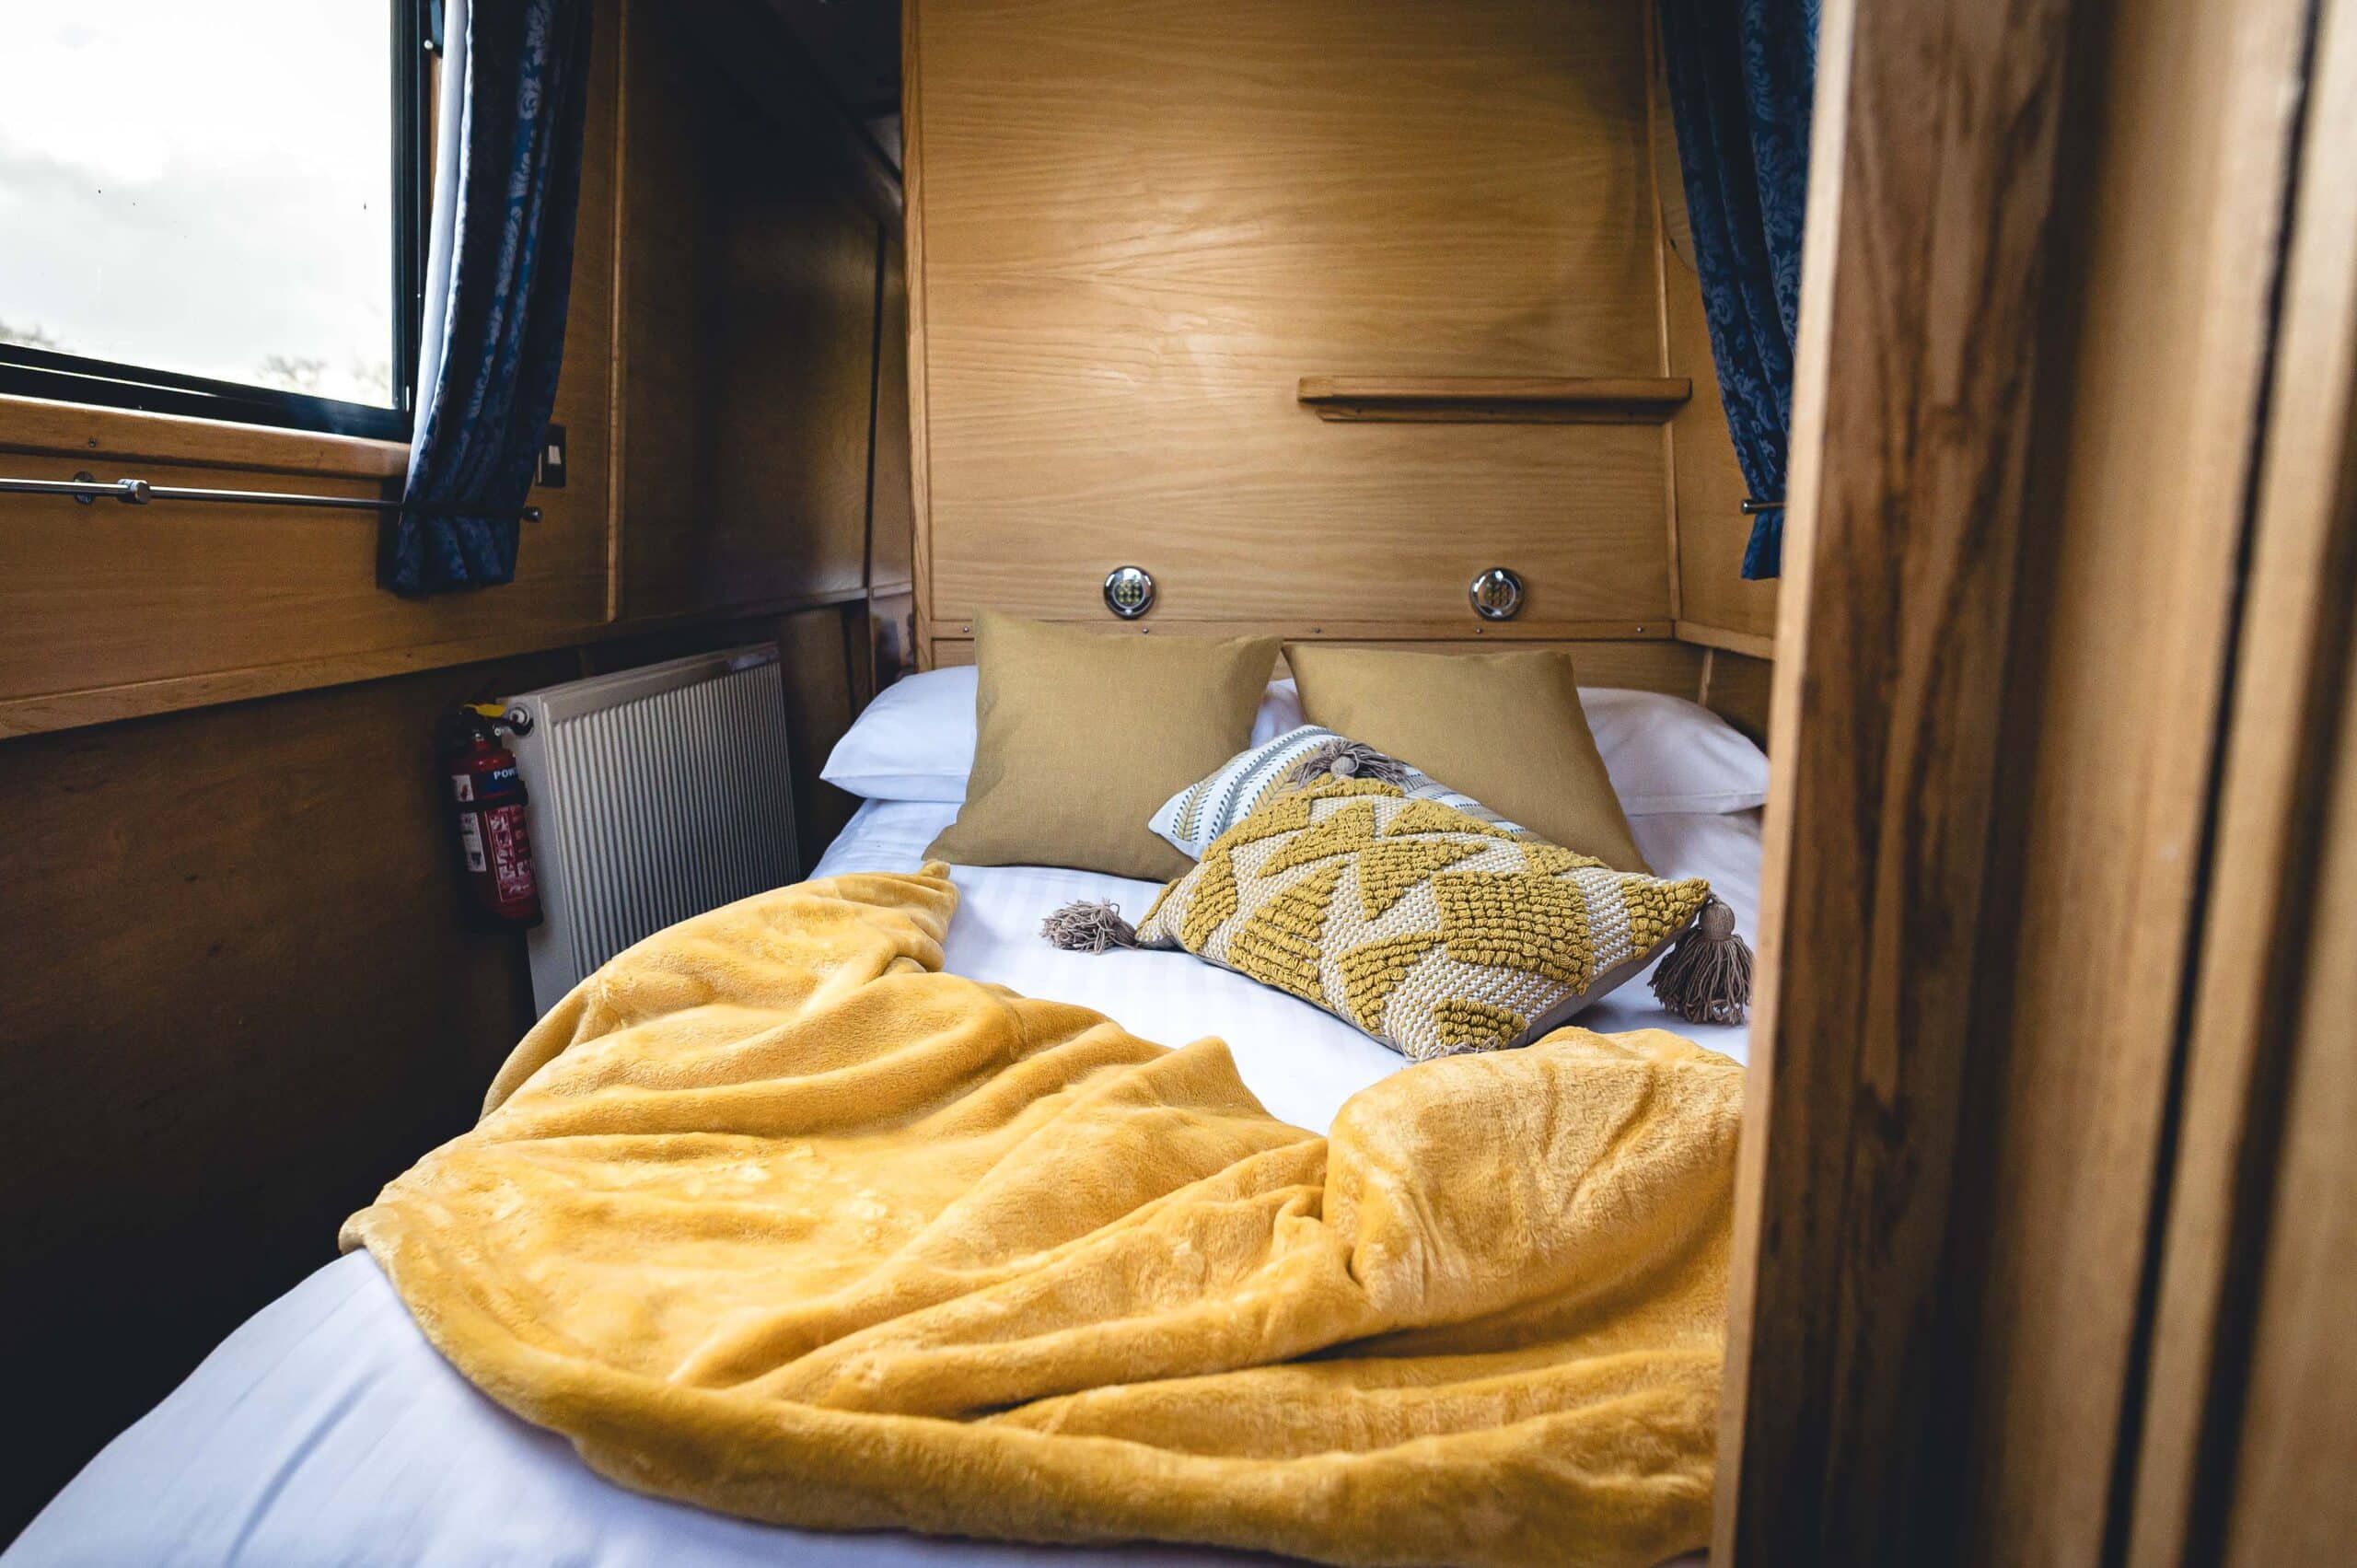 Our Constellation Class narrowboats offer luxury afloat